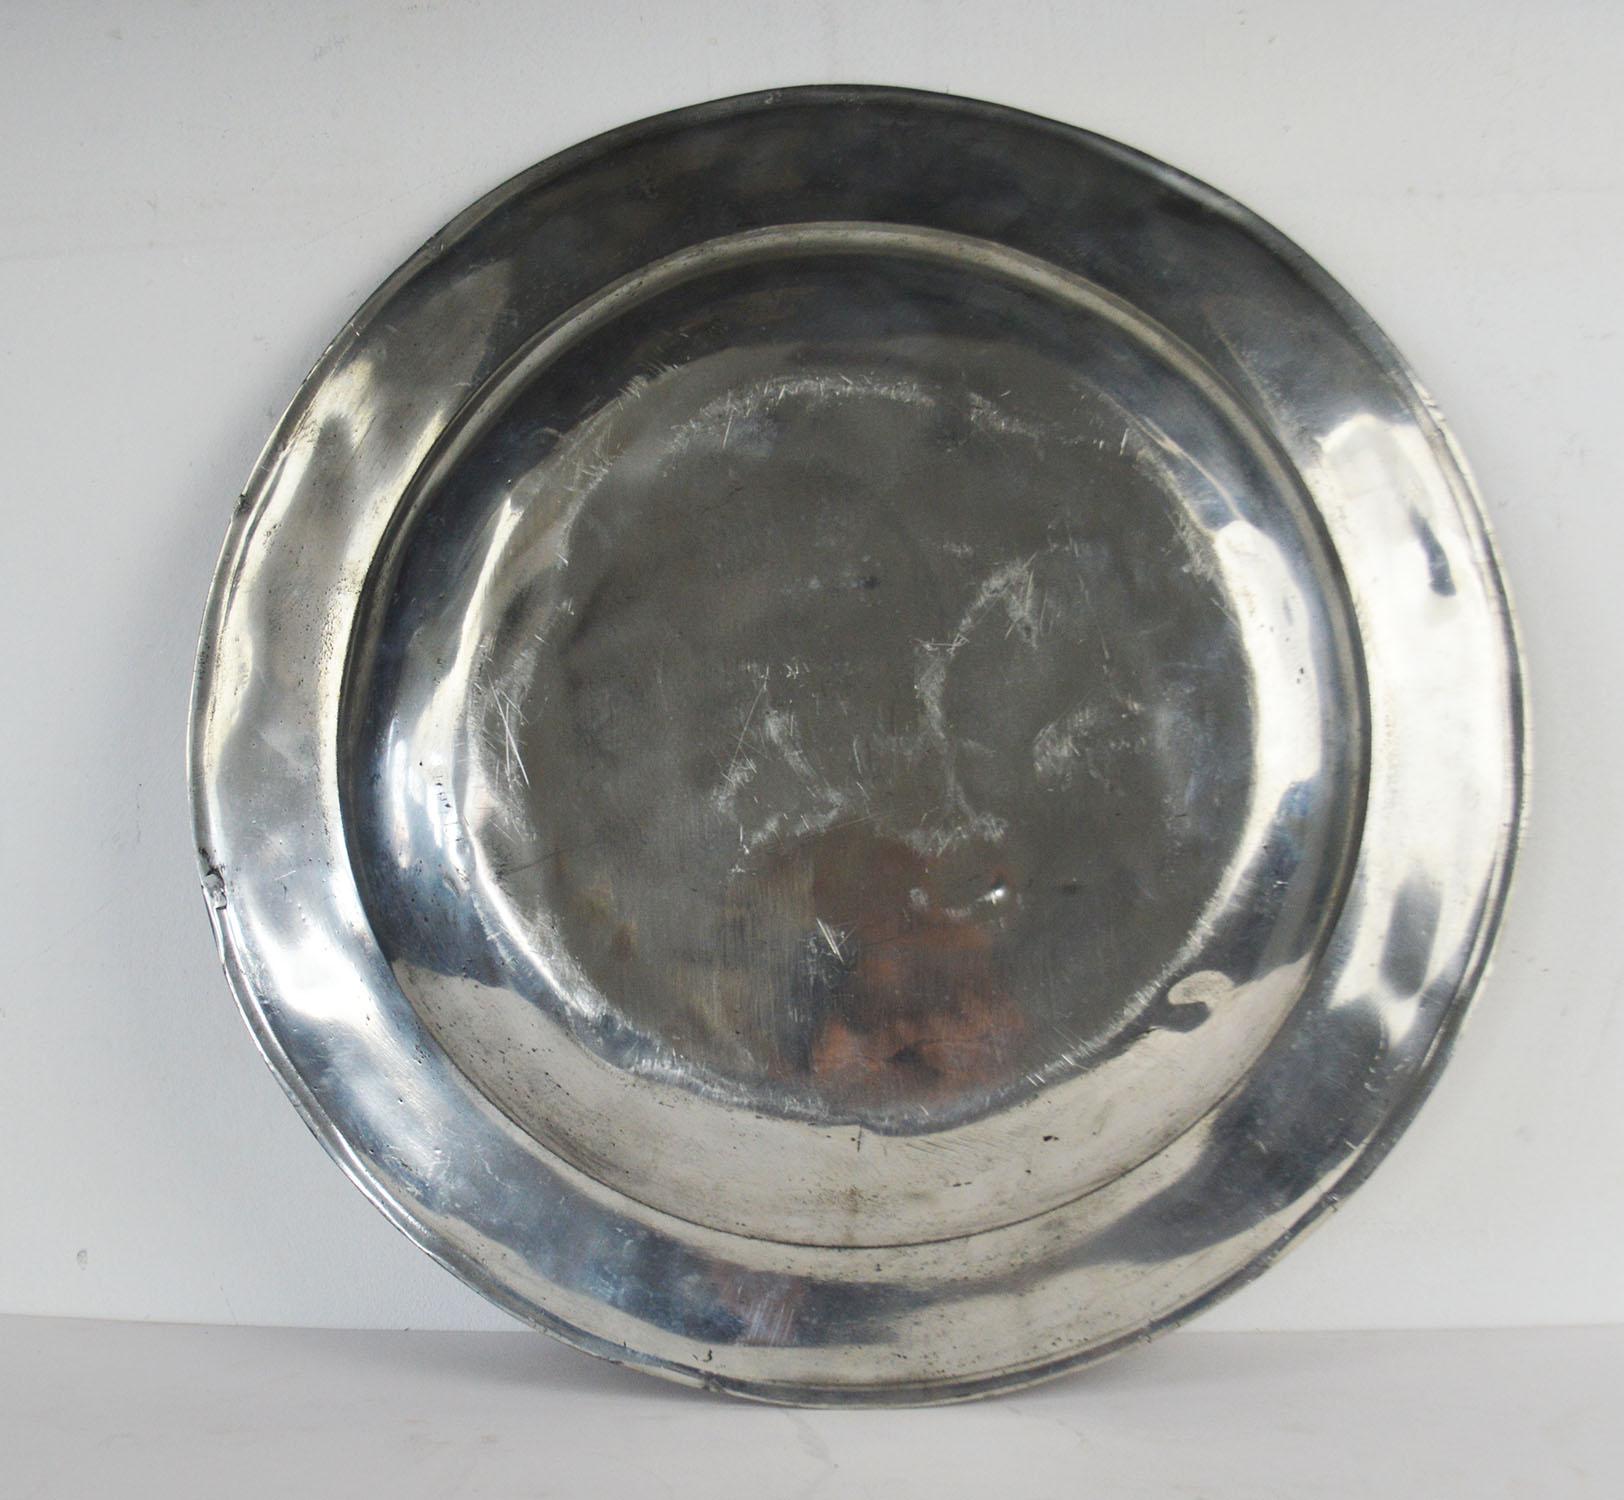  2 Antique Brightly Polished 15 inch Pewter Chargers, English, 18th Century 5